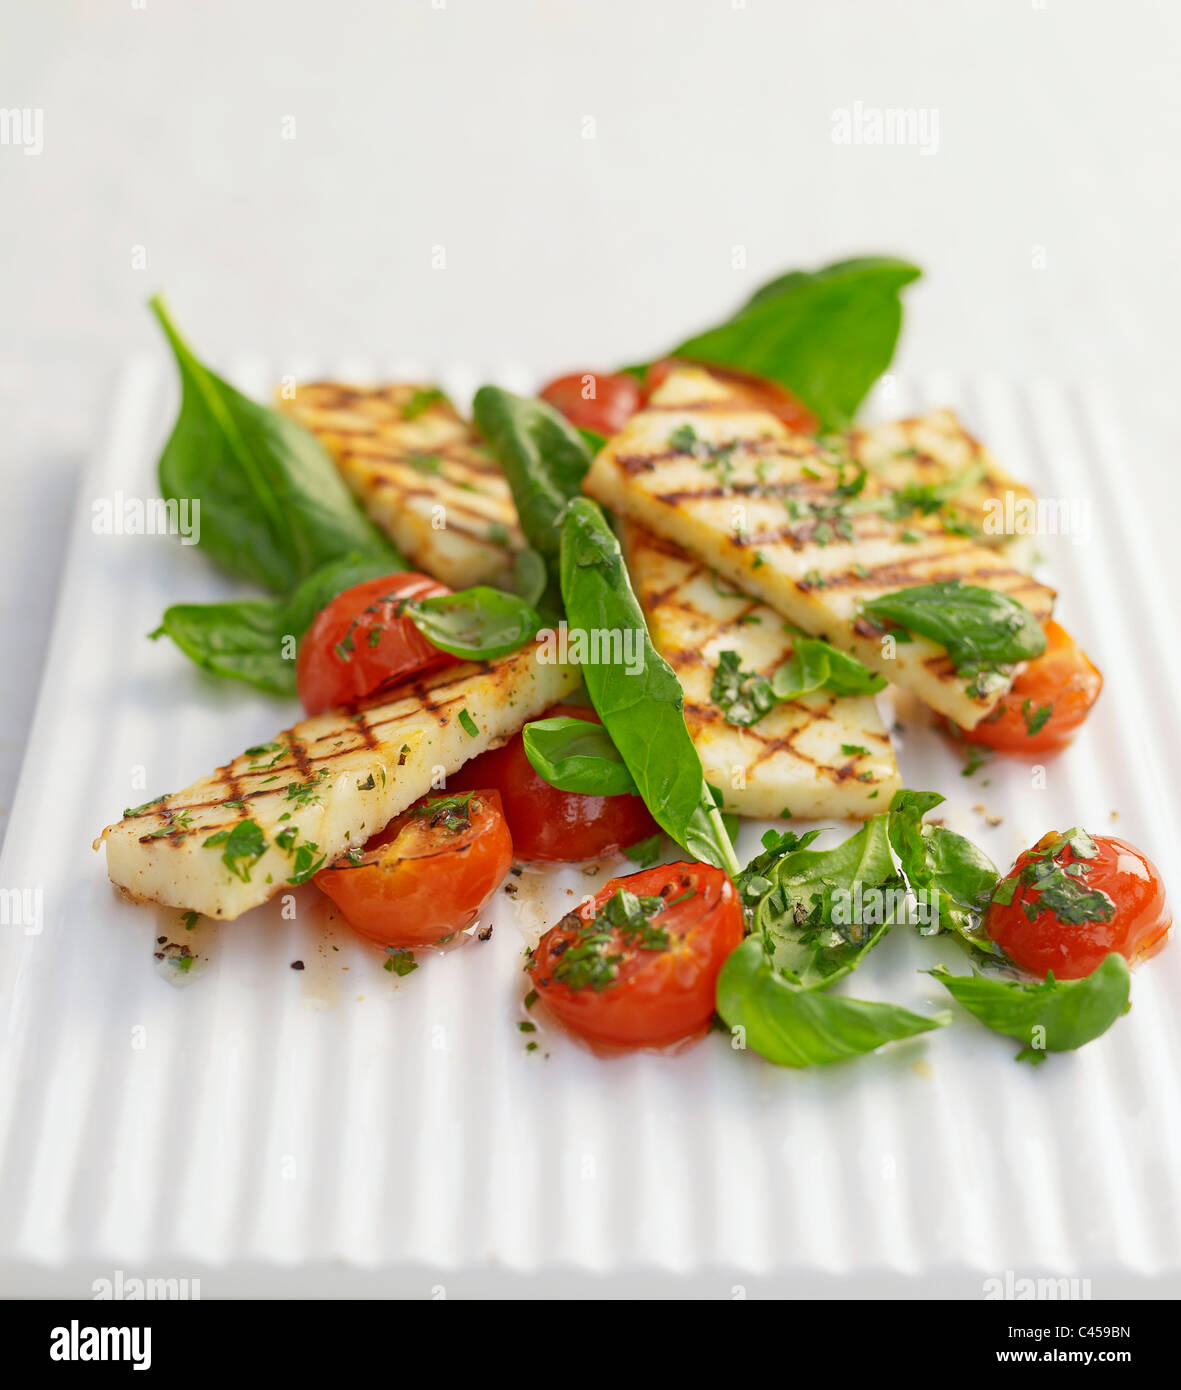 Grilled halloumi with roast tomatoes on plate, close-up Stock Photo